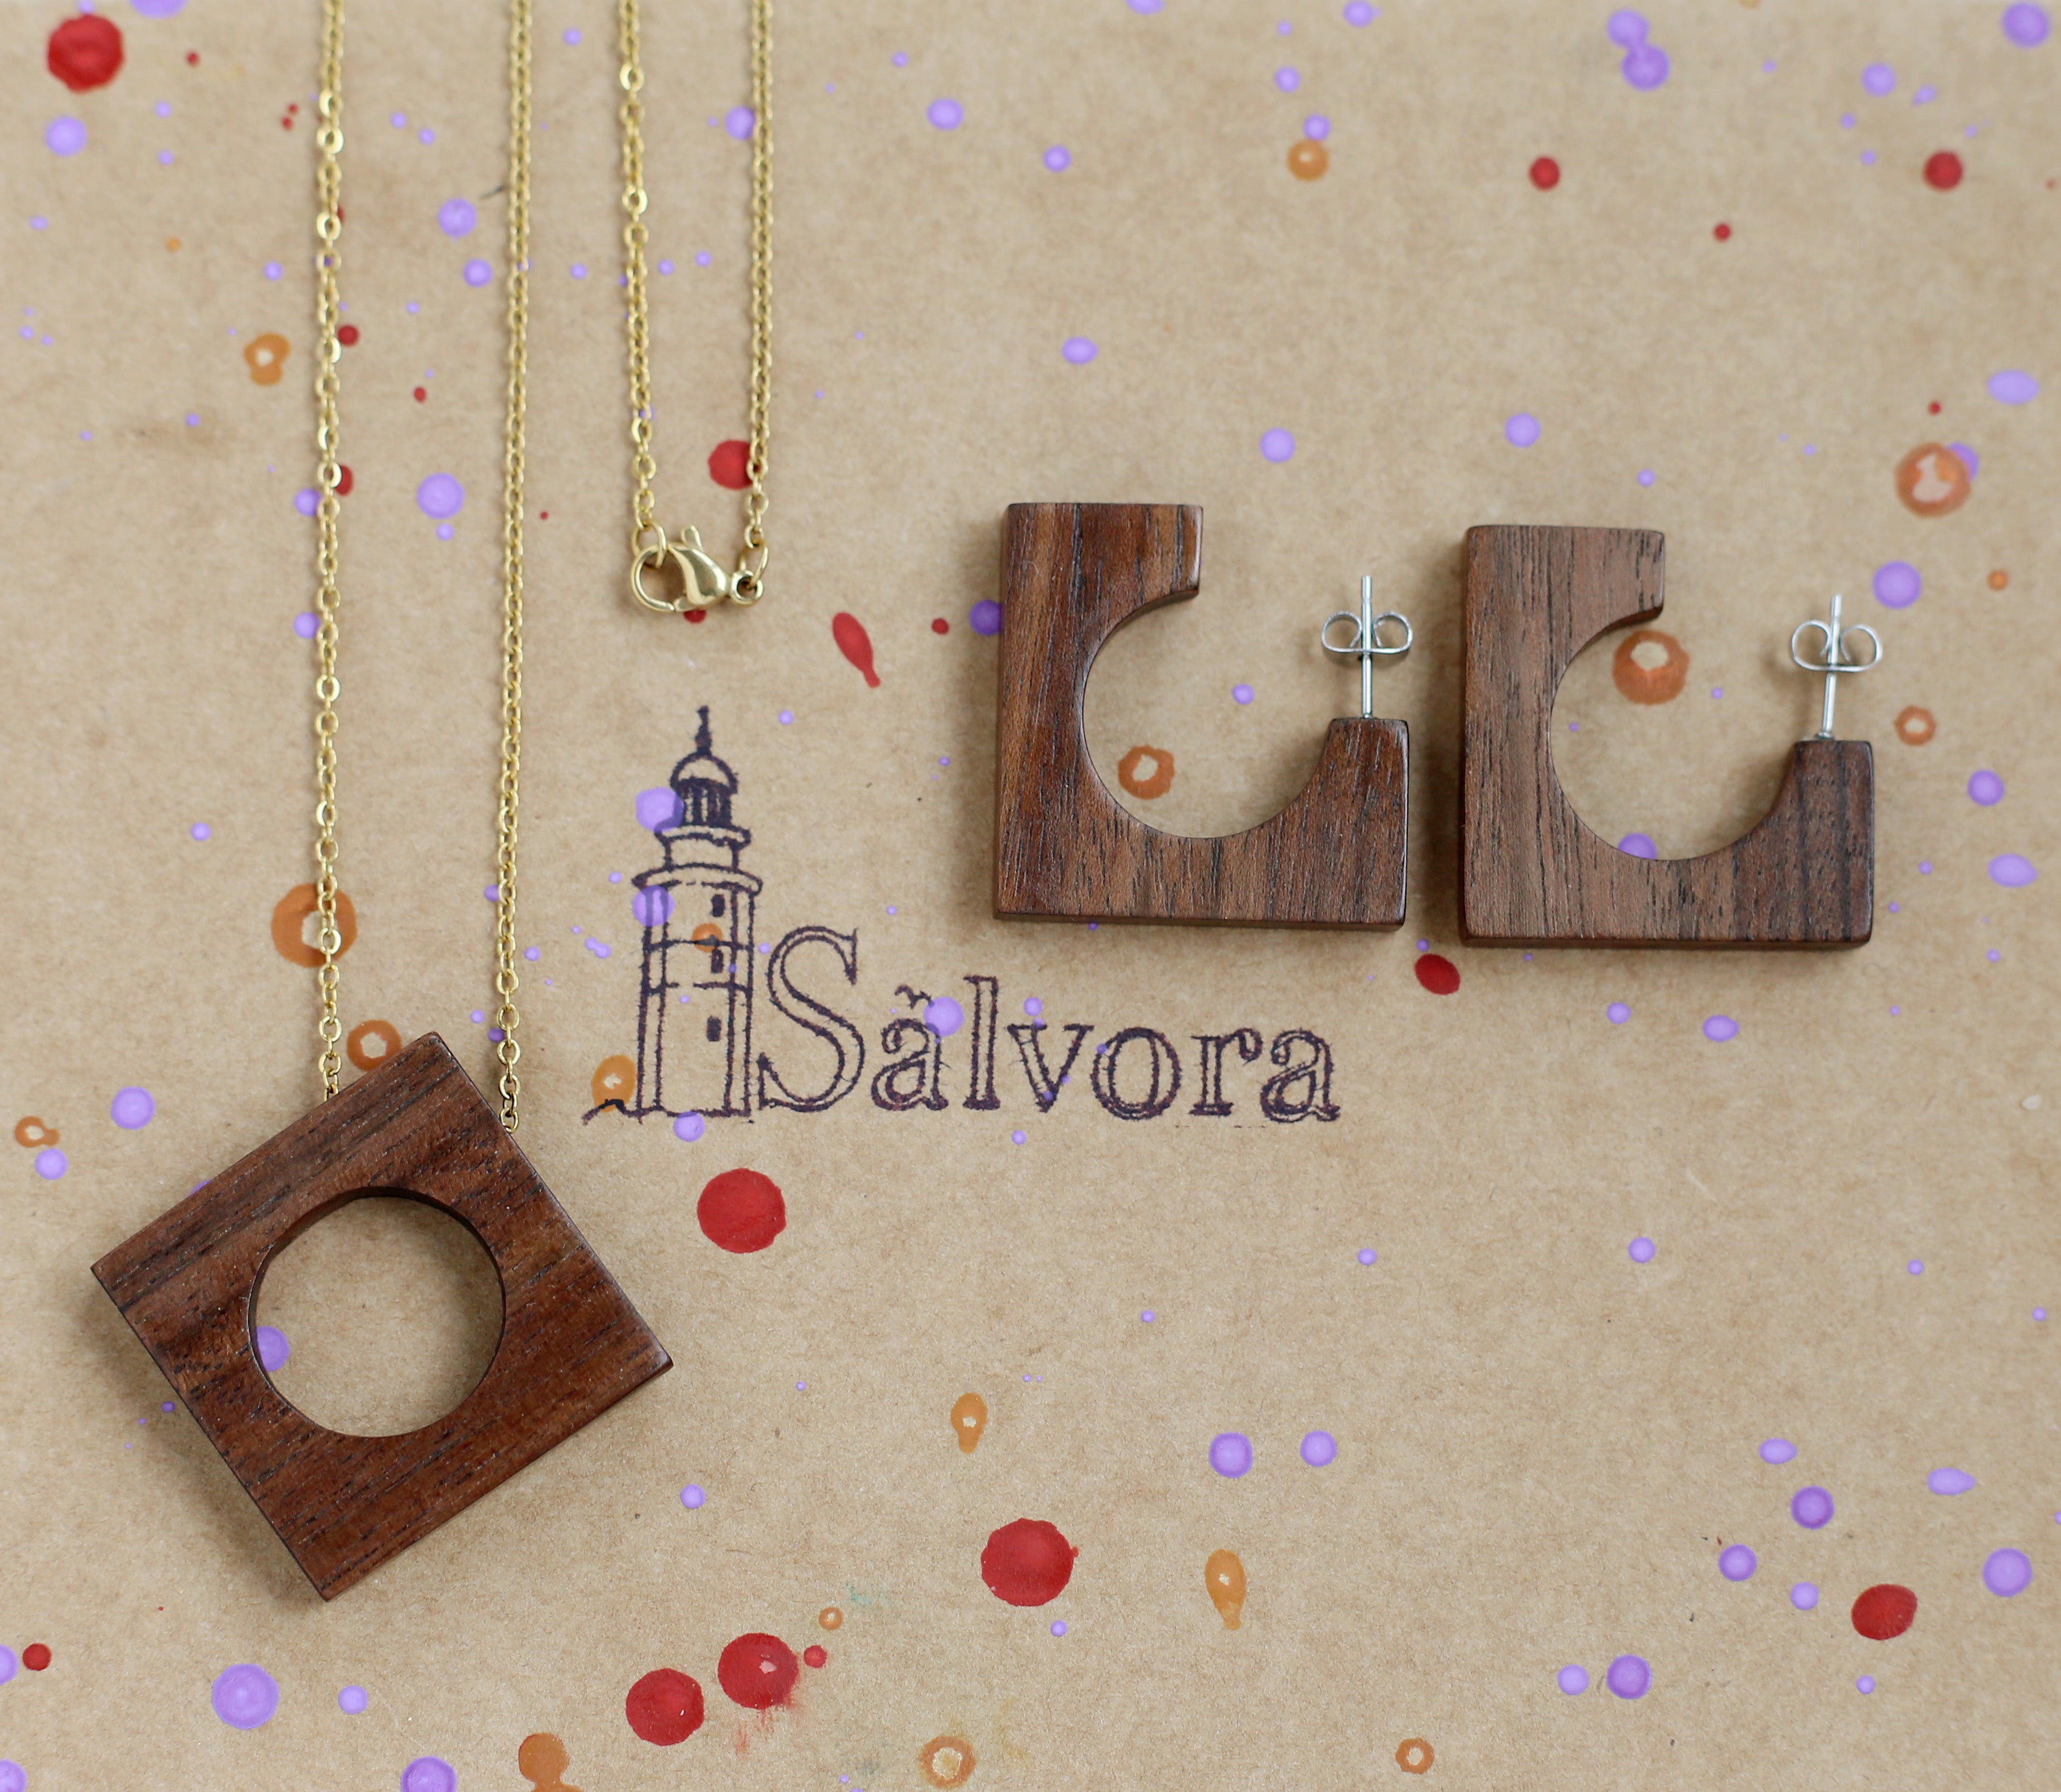 Precious wood jewelry with ethnic stud earrings and pendant, Wood necklace set with earrings stud, Mayan jewelry by Salvora